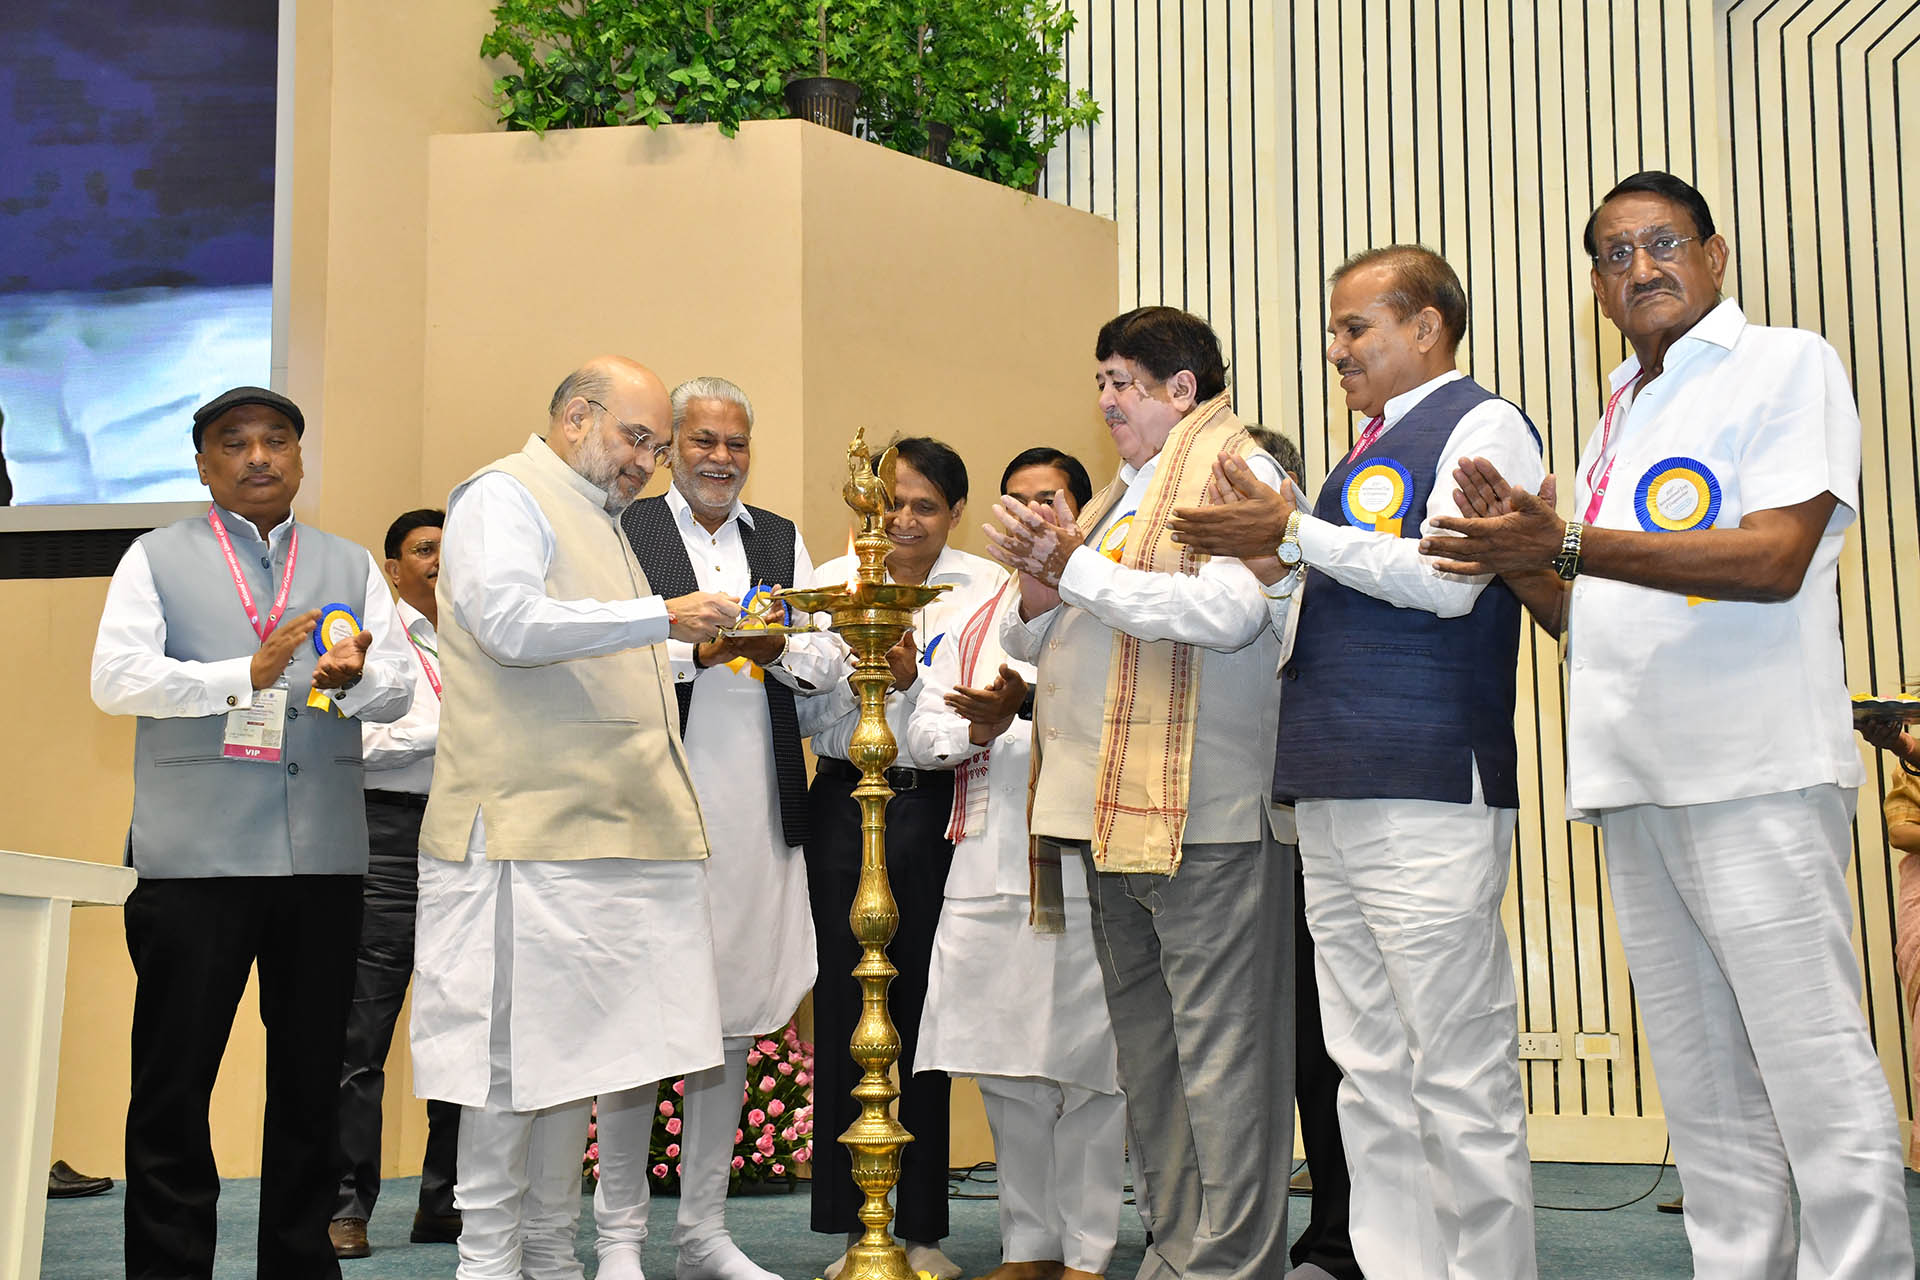 Shri Amit Shah Lighting the Lamp on the occasion of 100th International day of Cooperatives